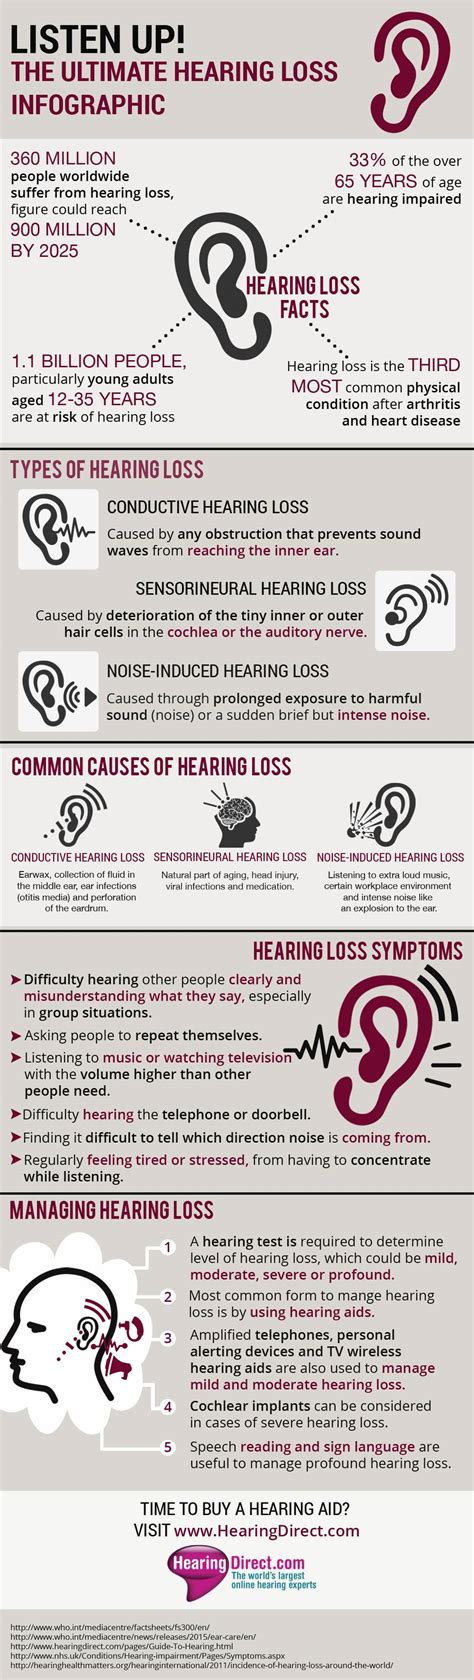 Listen Up The Ultimate Hearing Loss Infographic — Hearing Direct Us